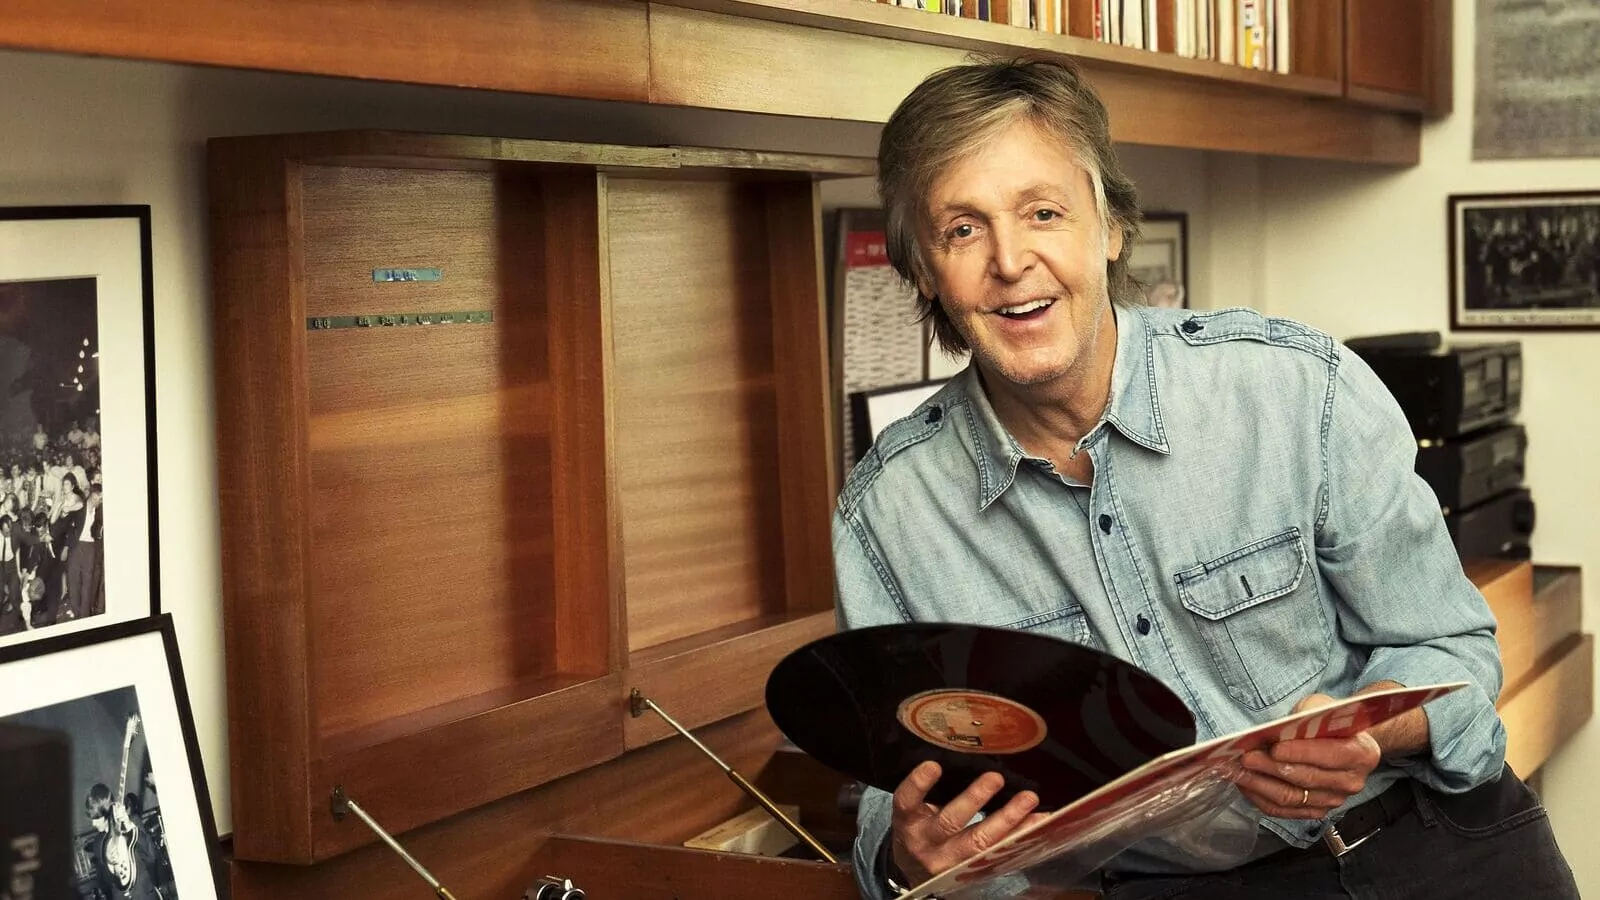 The 5 Songs That The Beatles Guitarist Paul McCartney Wishes He Wrote